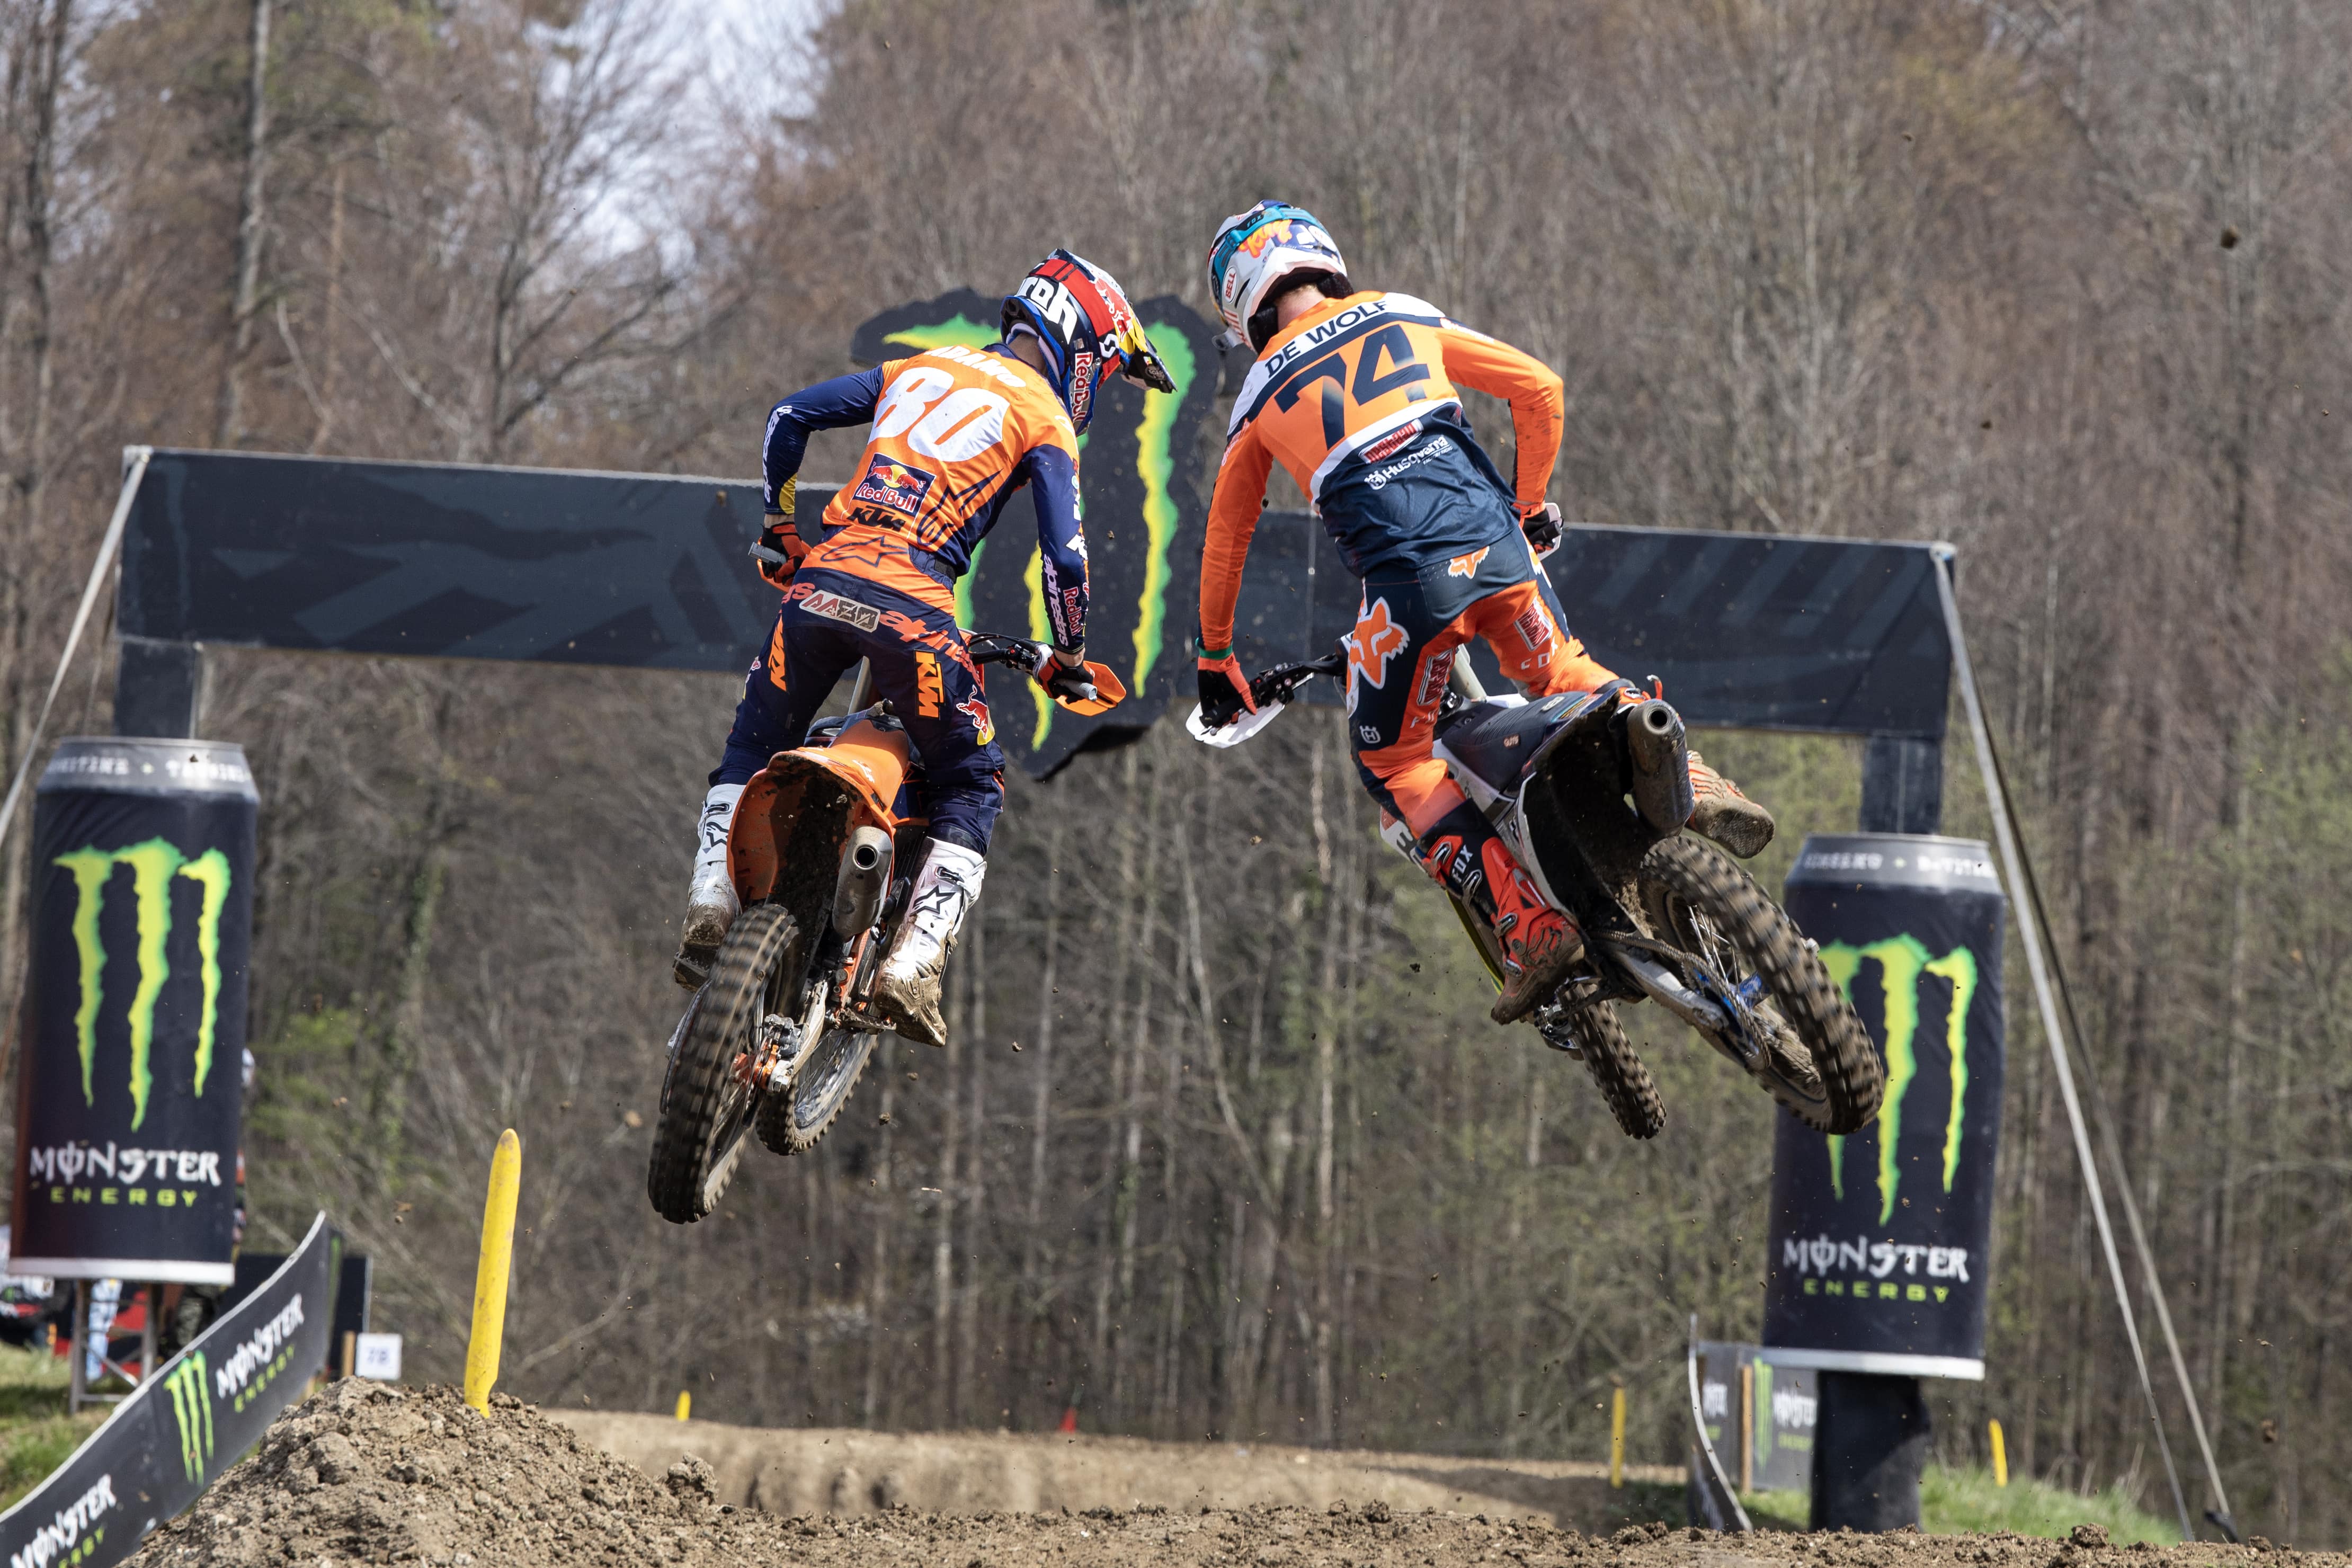 How to Watch the MXGP of Trentino, Schedule and Track Map